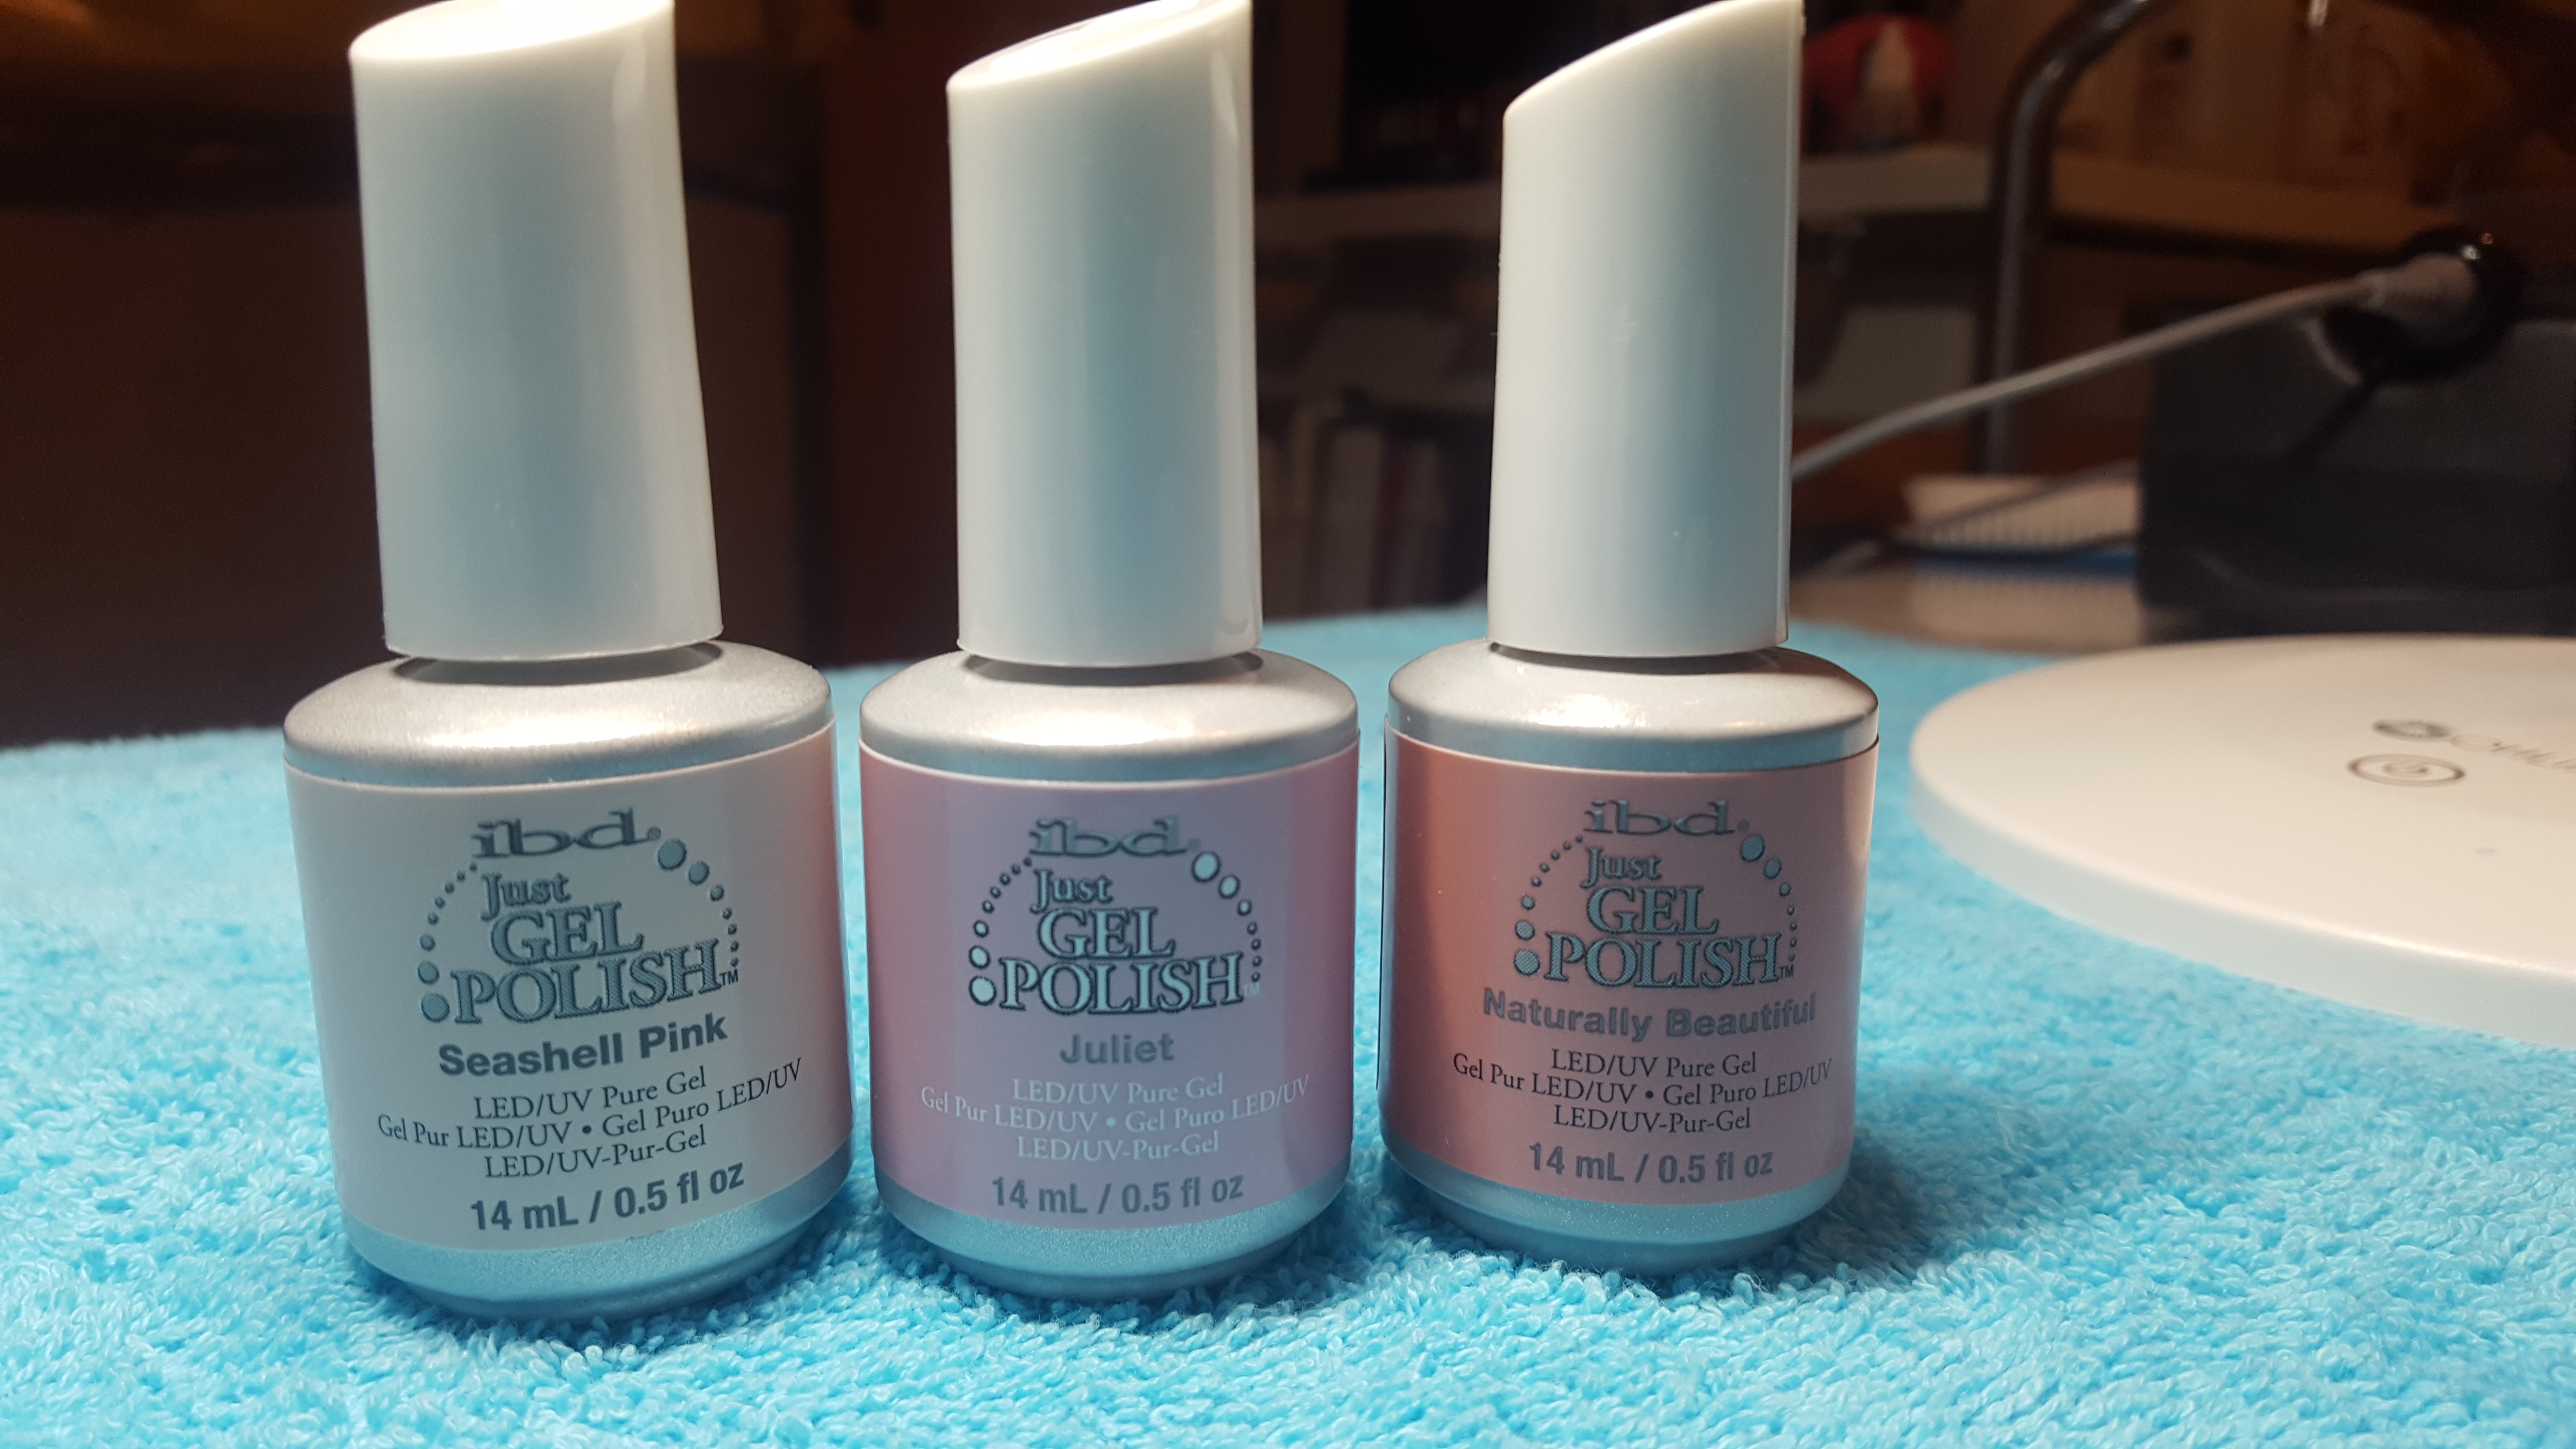 IBD Nail Polish and Entity Manicure (Get your gel color to last 2 weeks!)